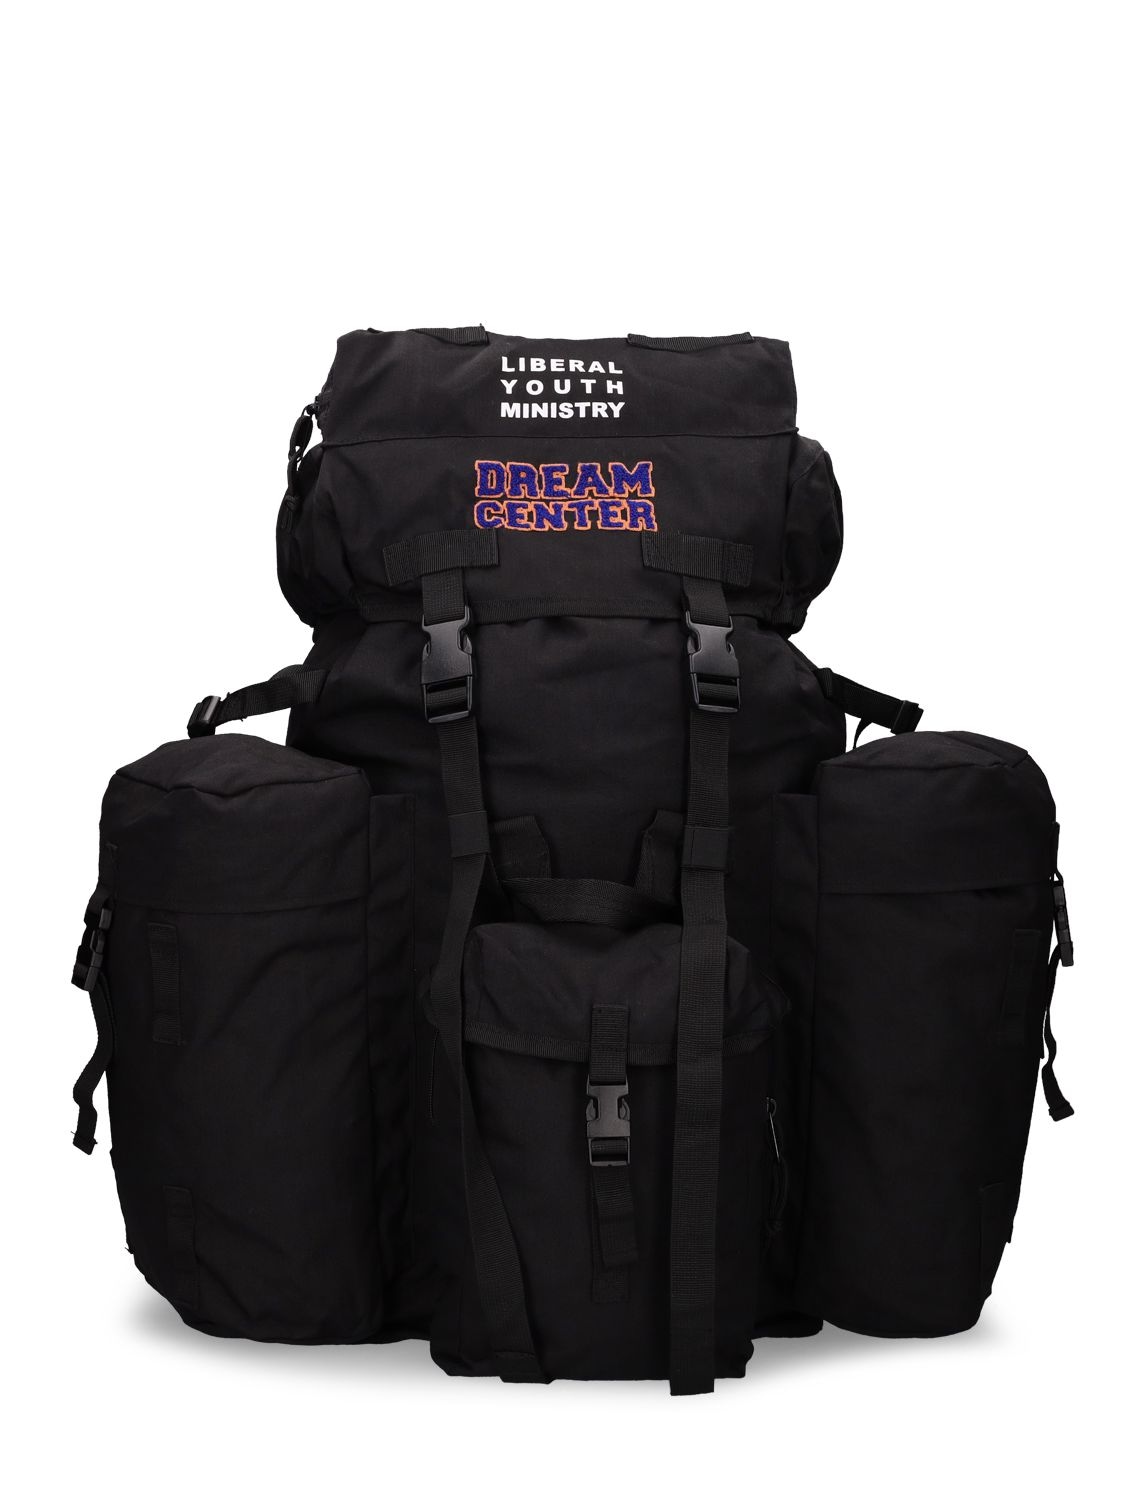 Liberal Youth Ministry Oversize Nylon Military Backpack W/ Logo In Black